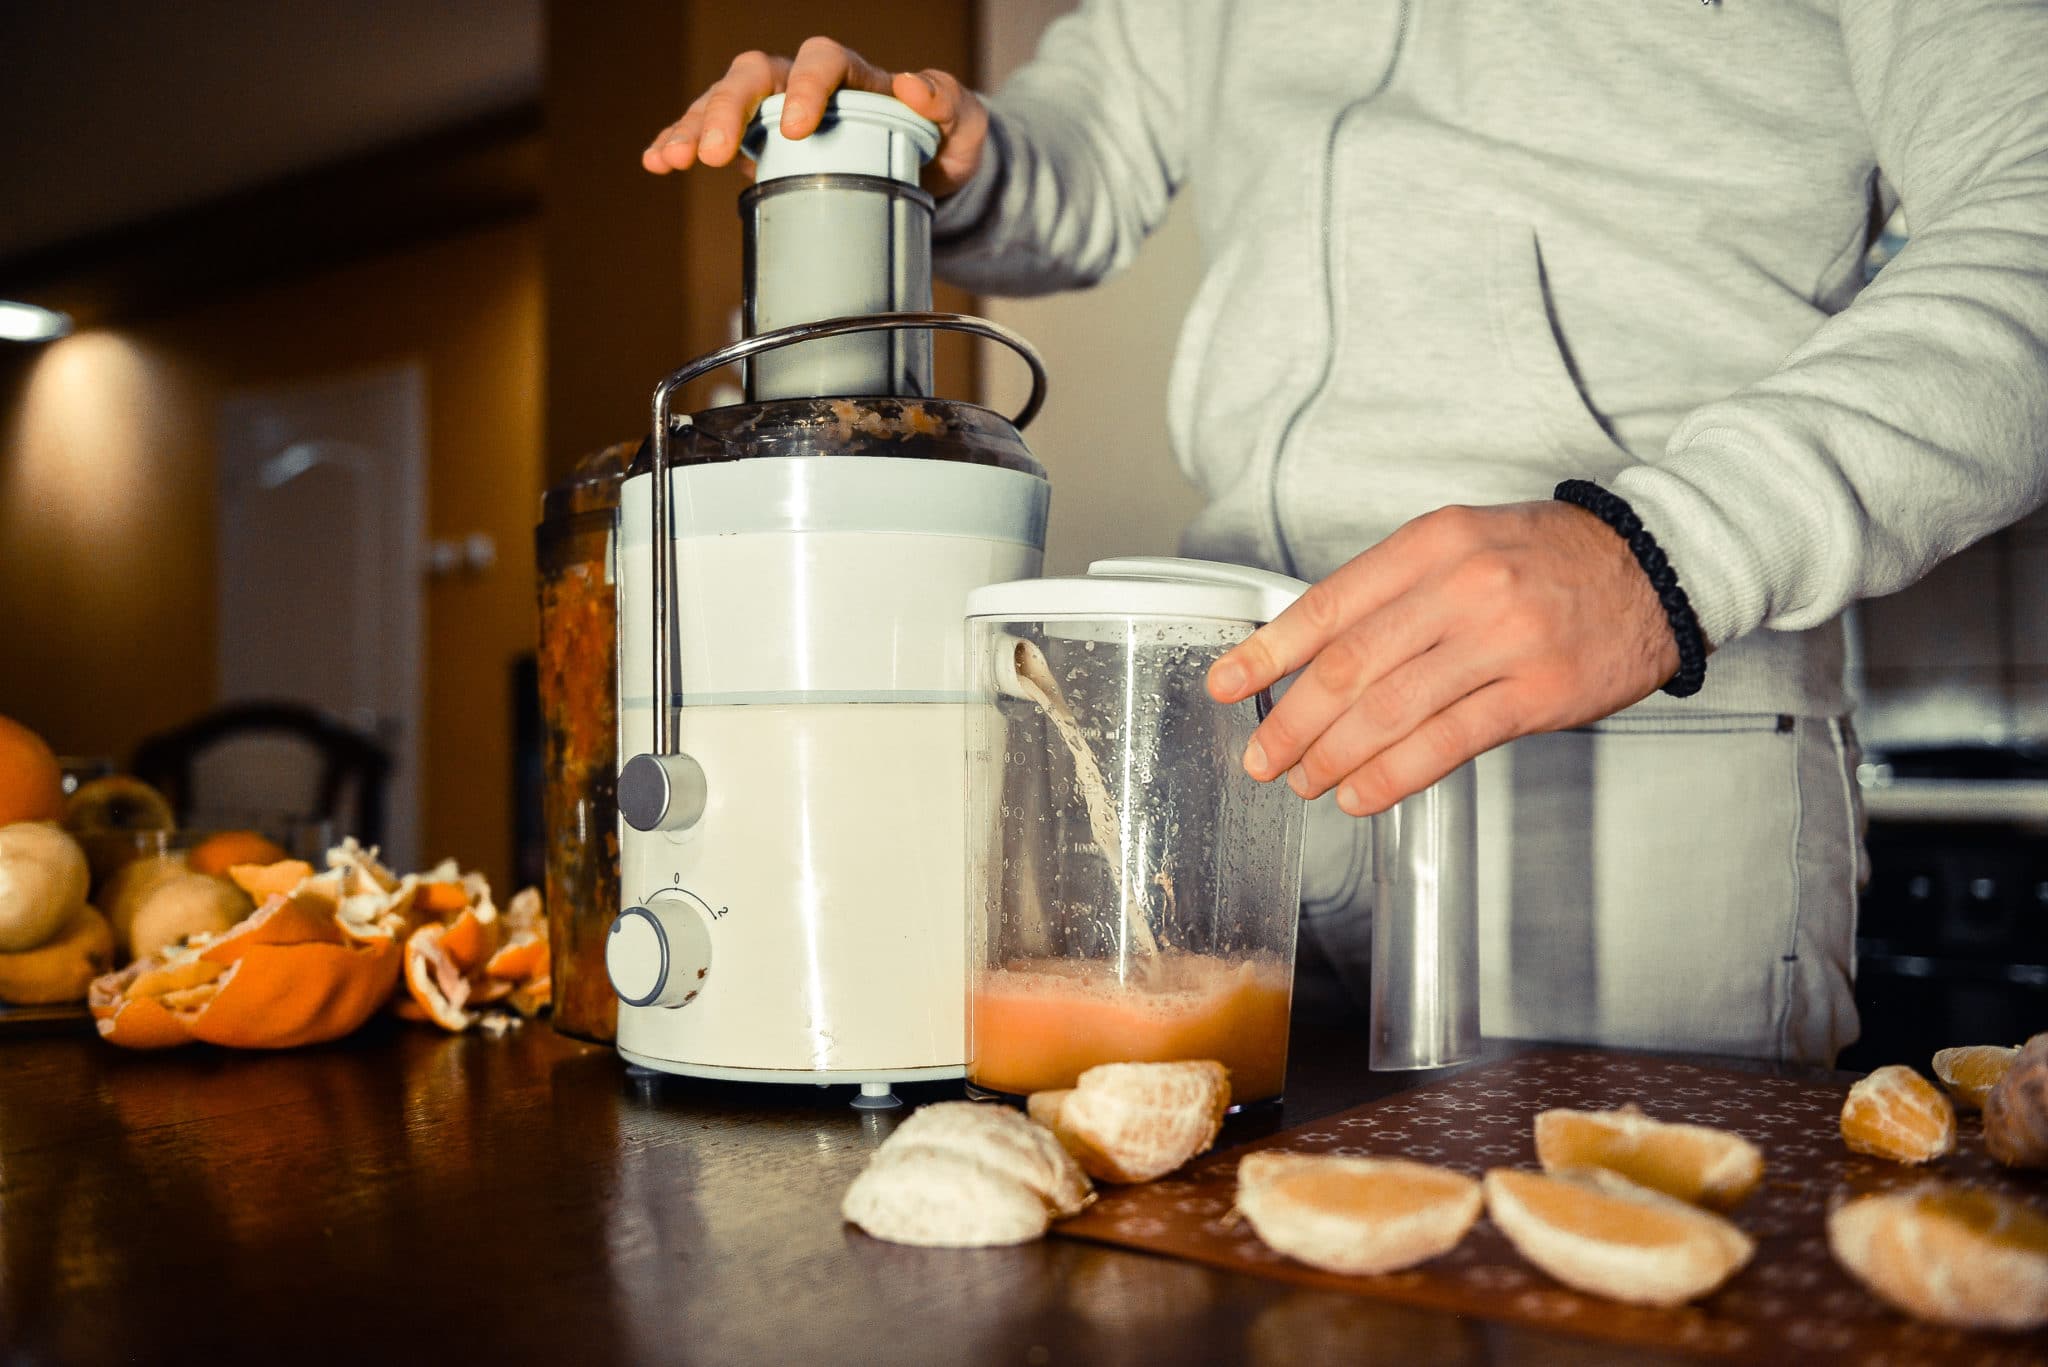 How to Clean a Juicer in 7 Easy Steps